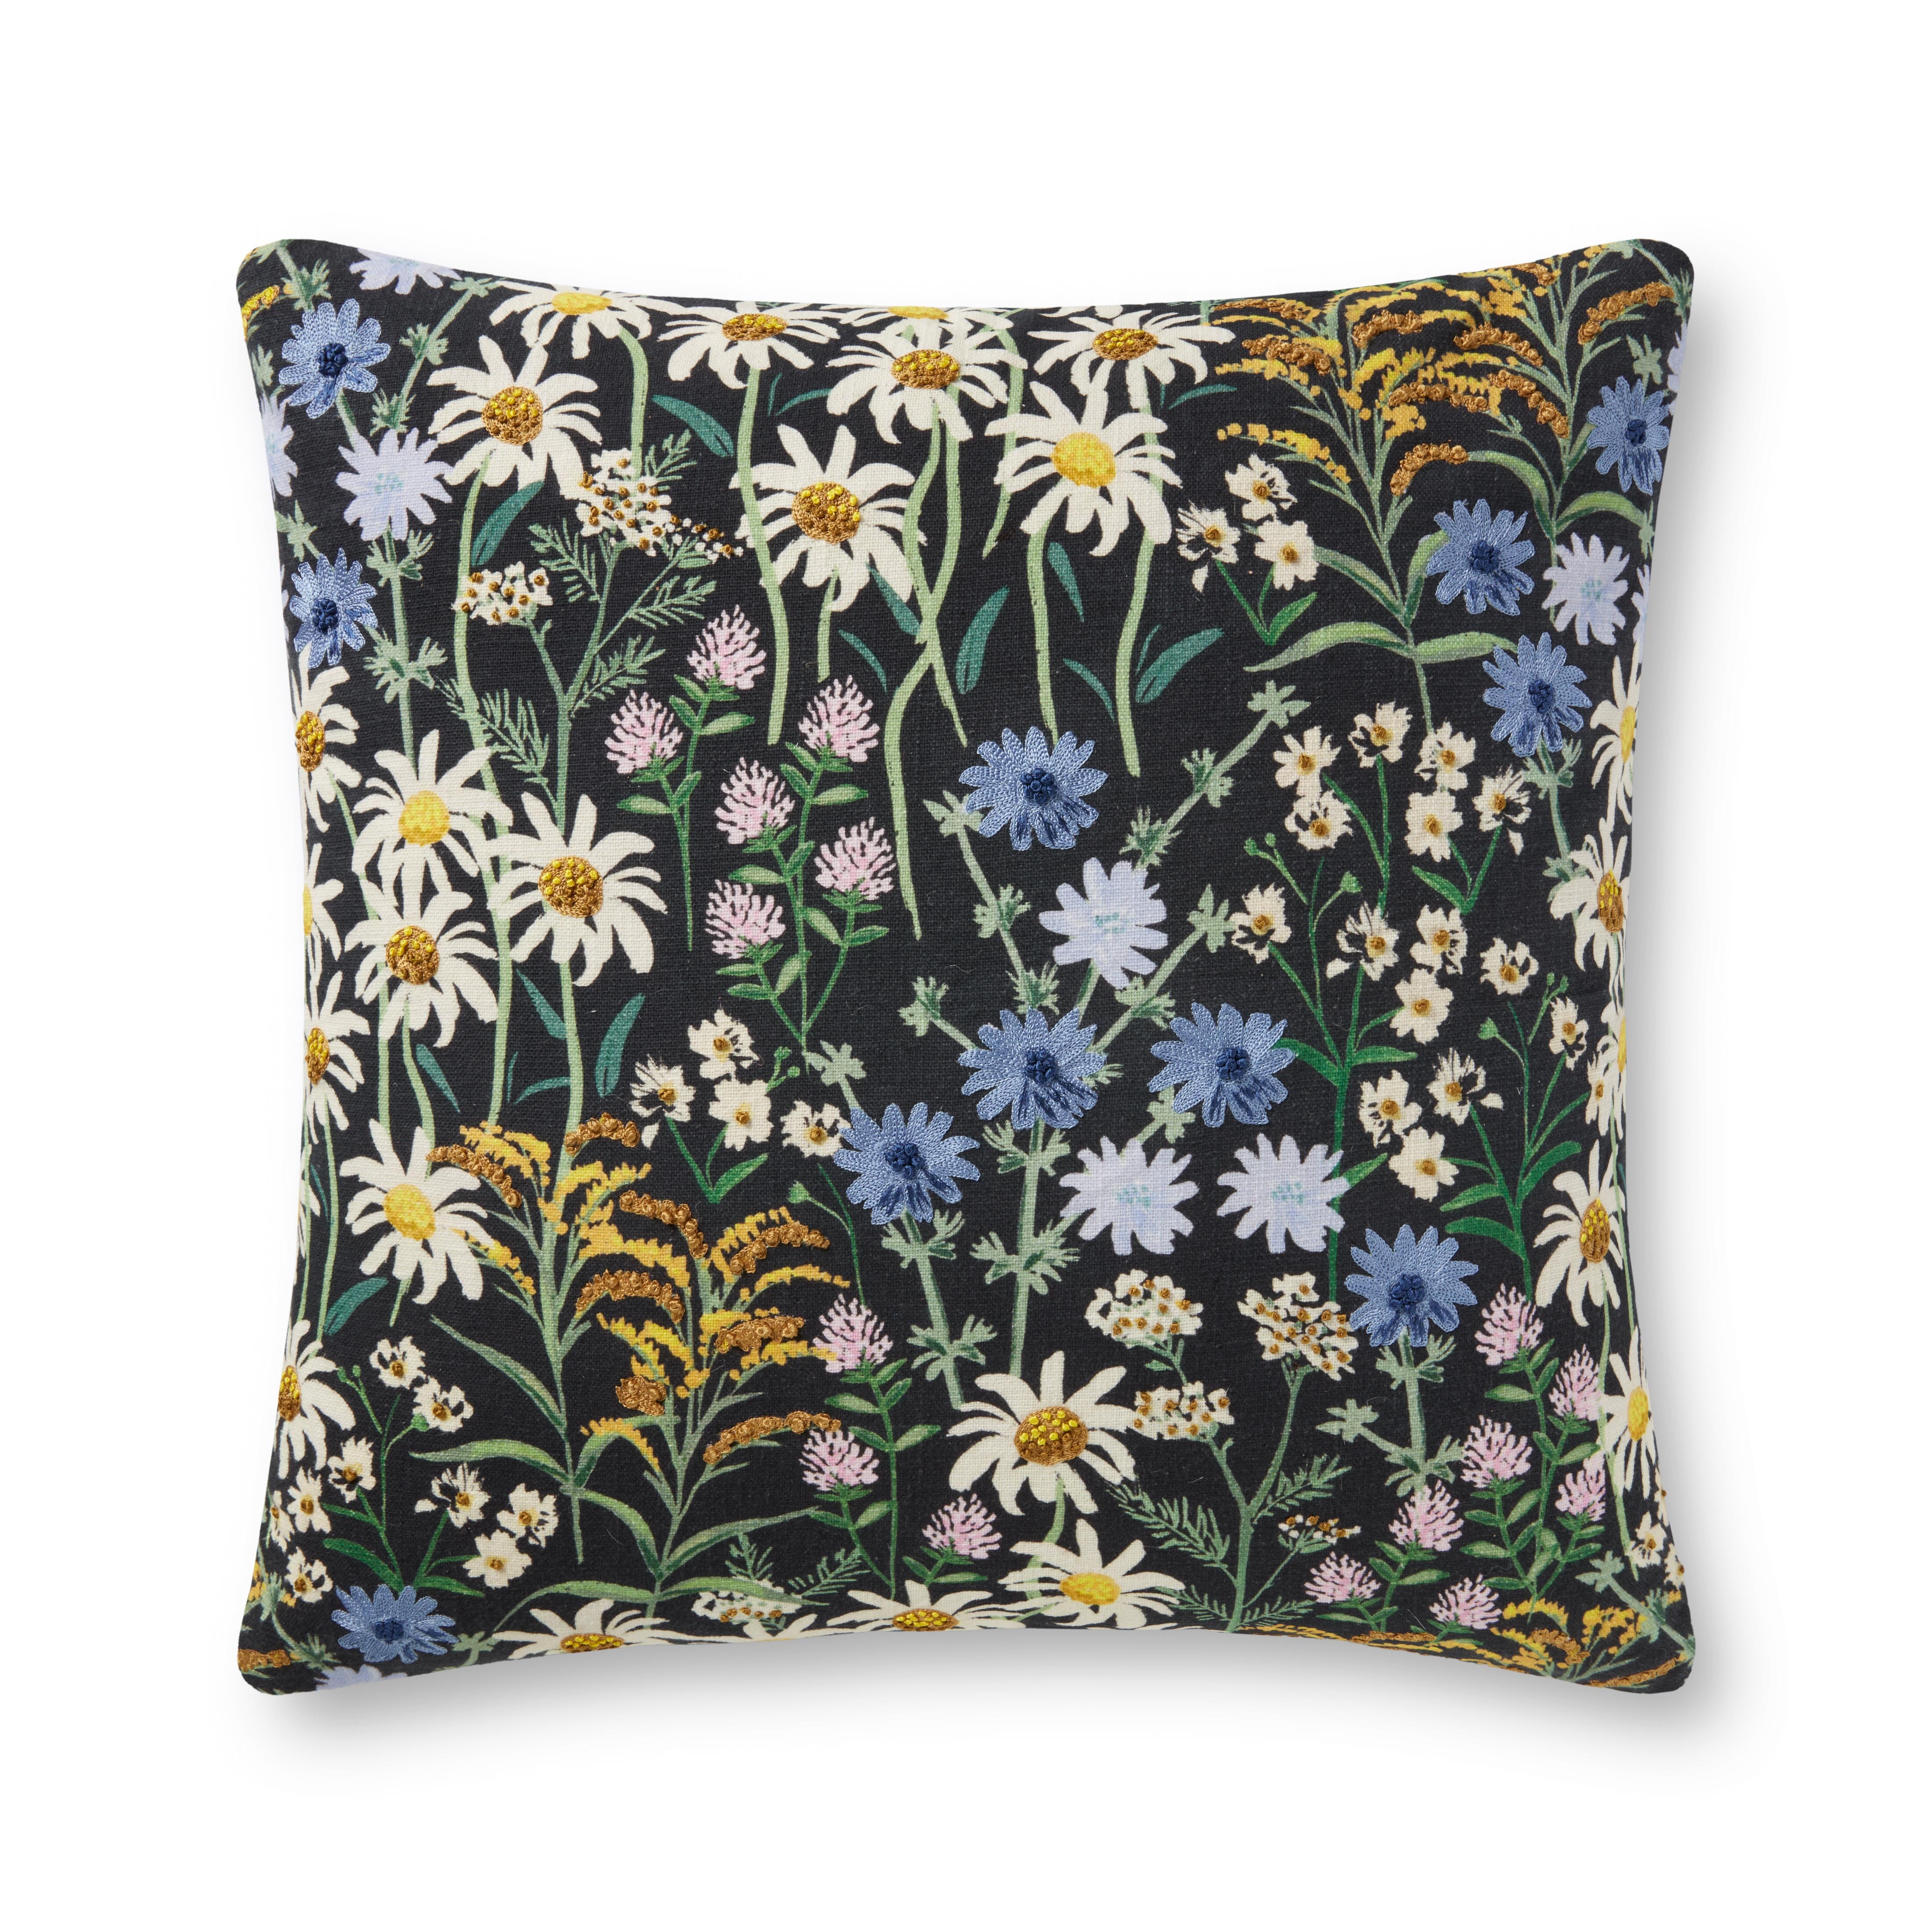 Rifle Paper Co. x Loloi Pillow | Wildflowers Black Rifle Paper Co. x Loloi